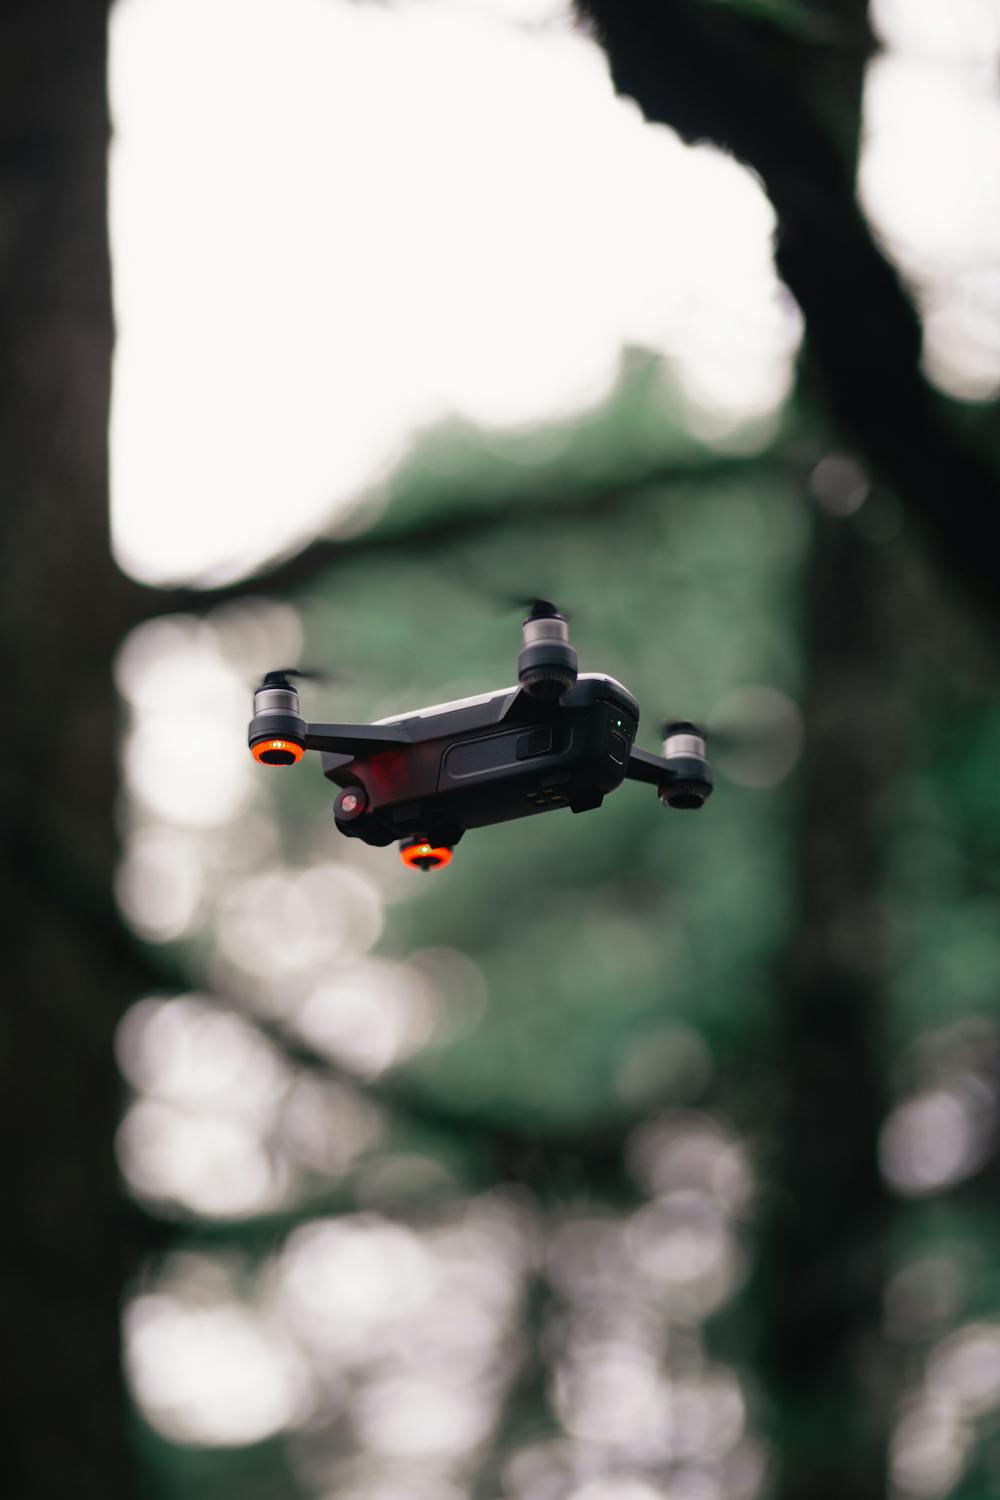 Black Quadcopter Drone Hovering Midair · Free Stock Photo